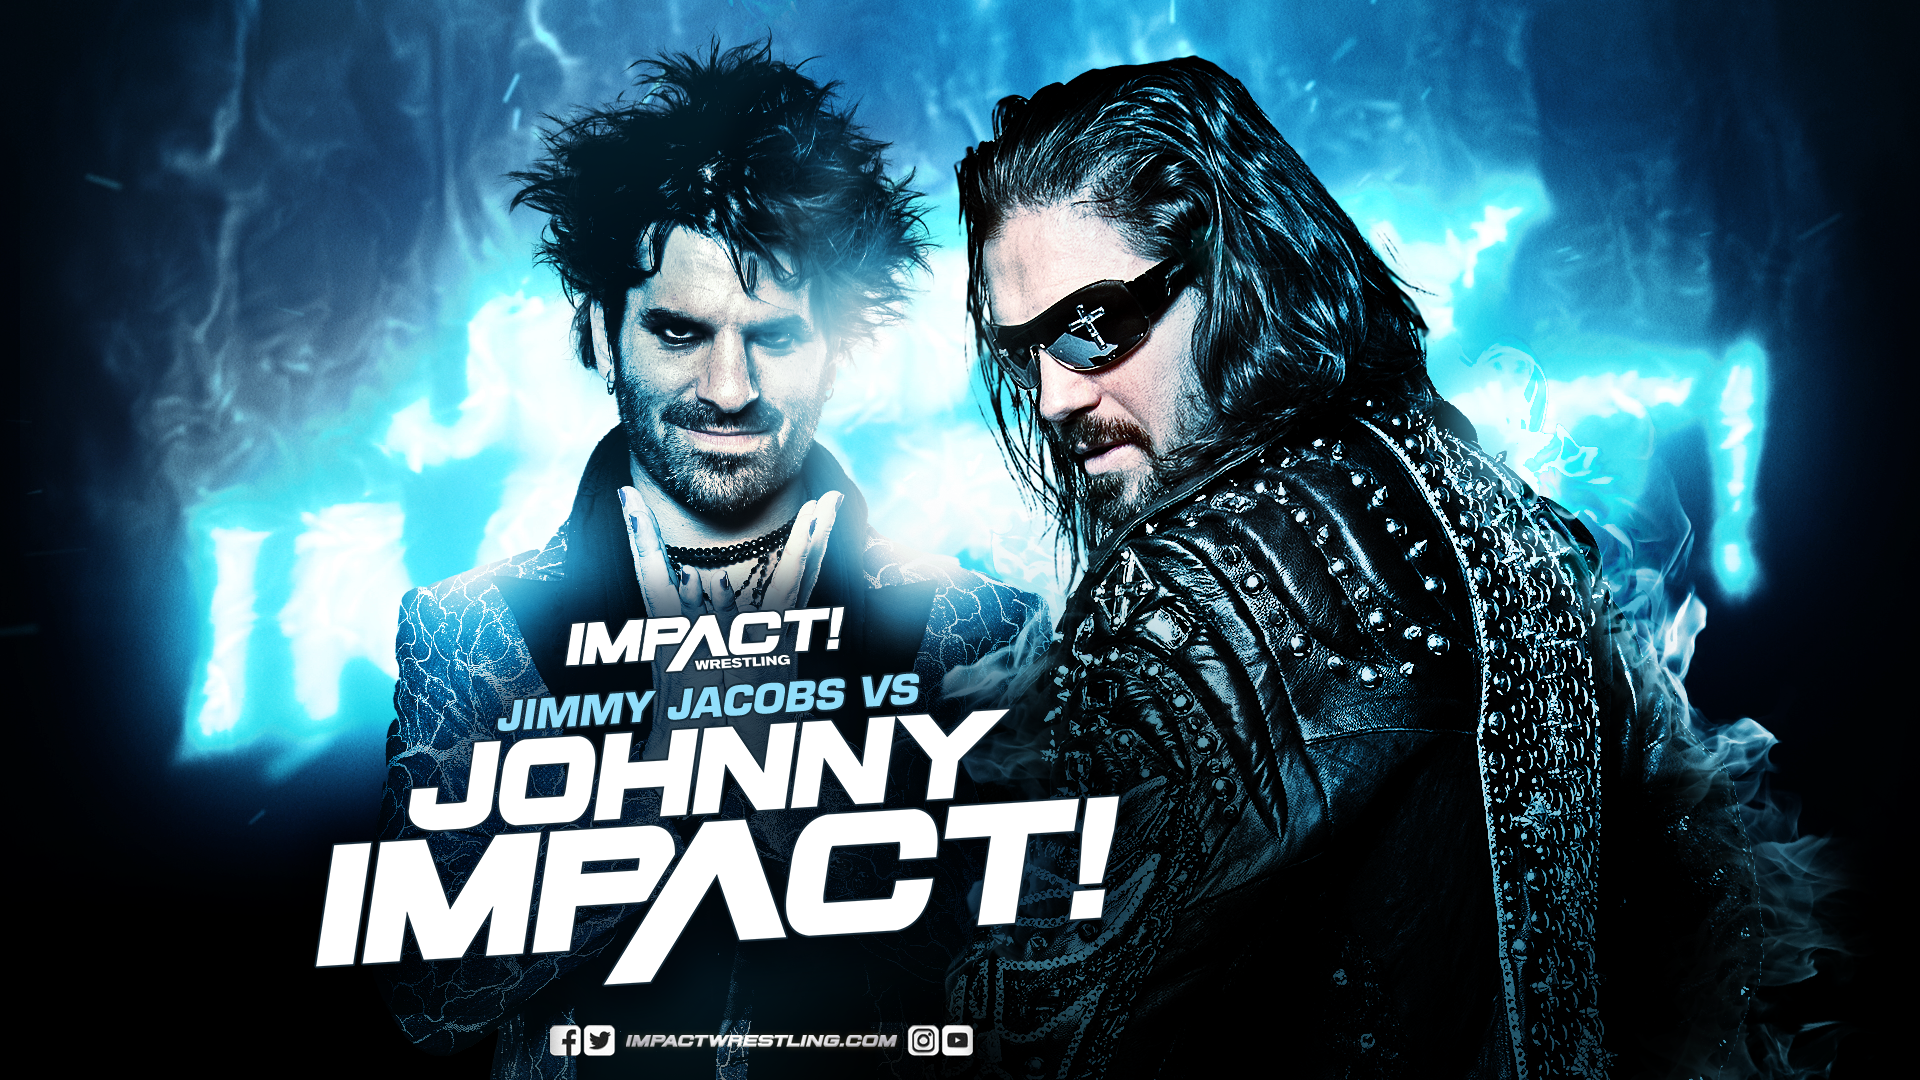 Impact Preview & Discussion: Jimmy Jacobs v Johnny Impact, Hear From Aries & Kross, Su Yung v Allie, More